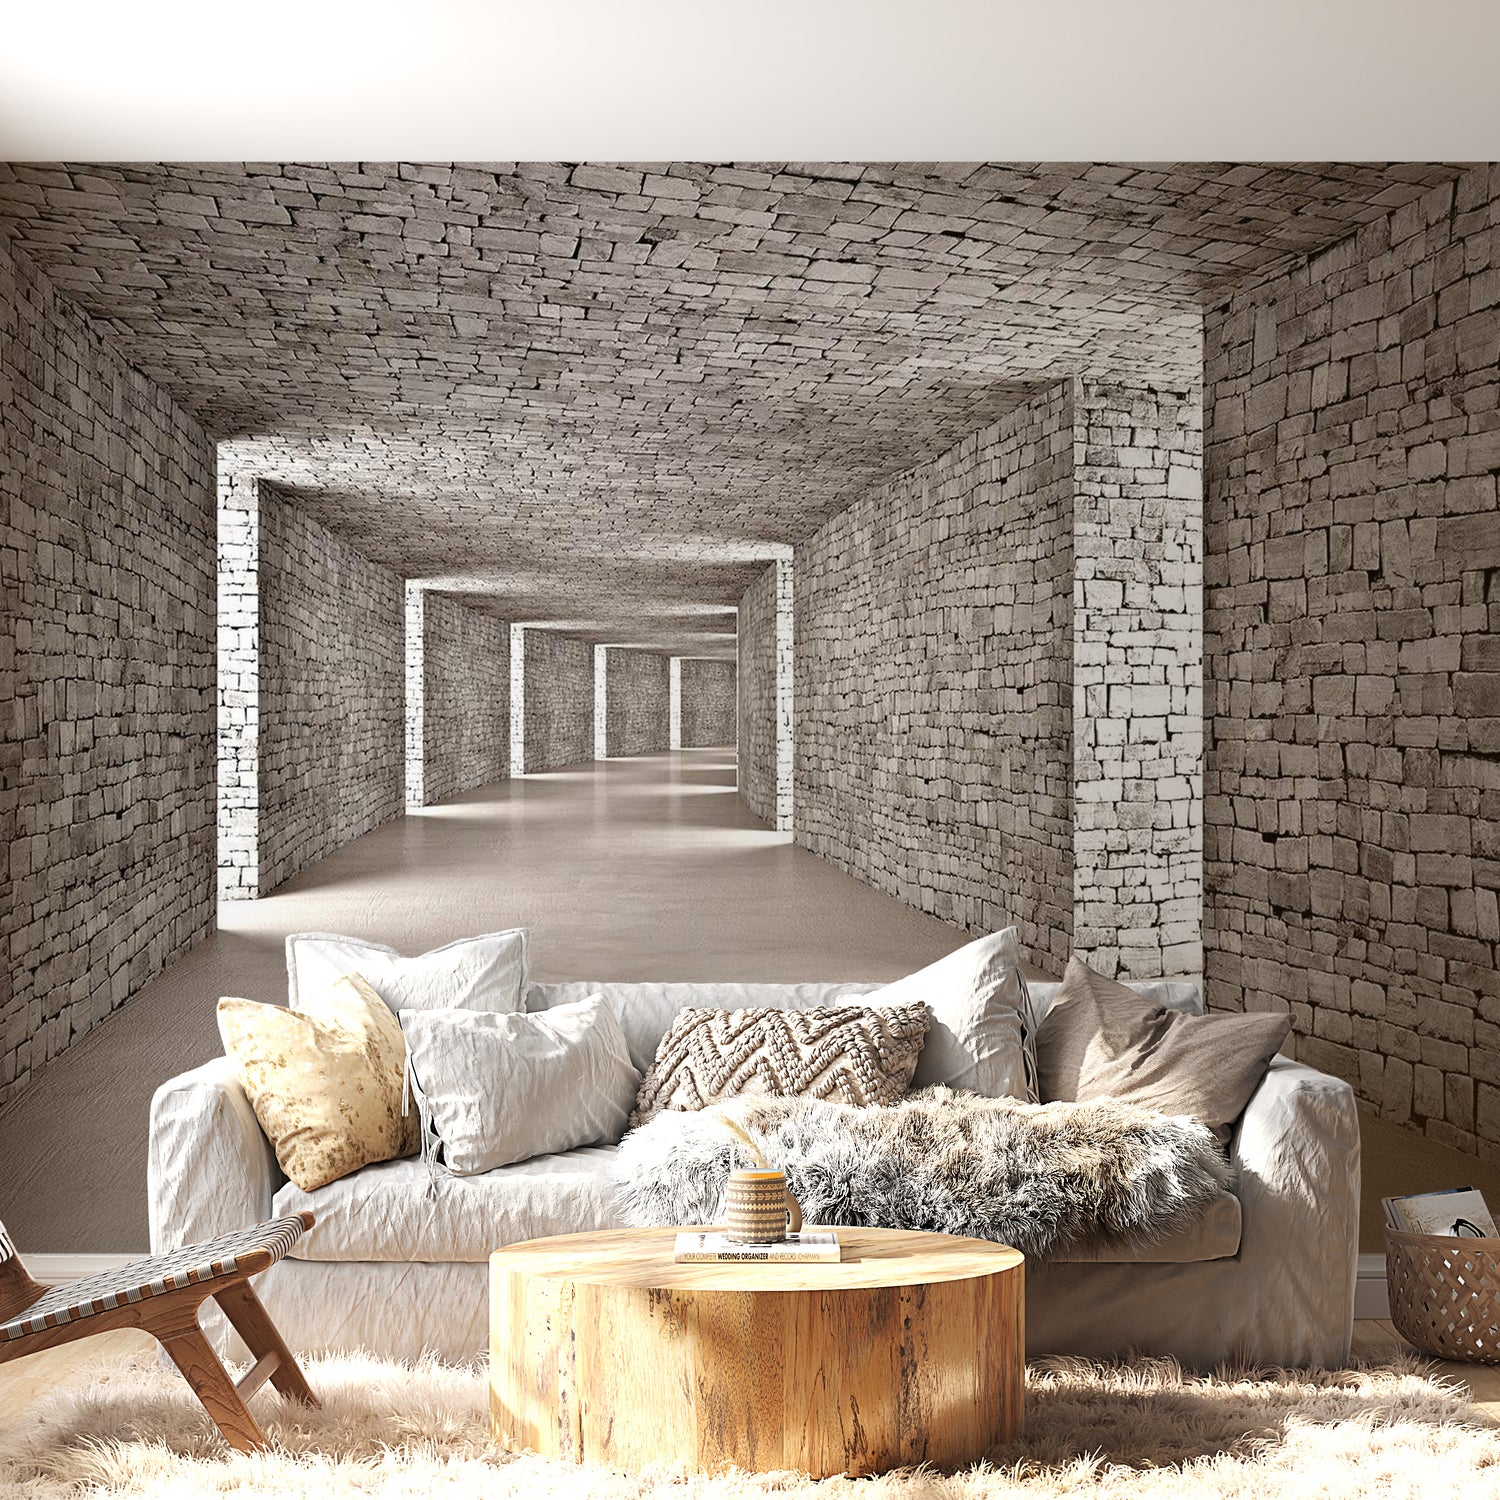 Peel & Stick 3D Illusion Wall Mural - Mysterious Tunnel - Removable Wall Decals